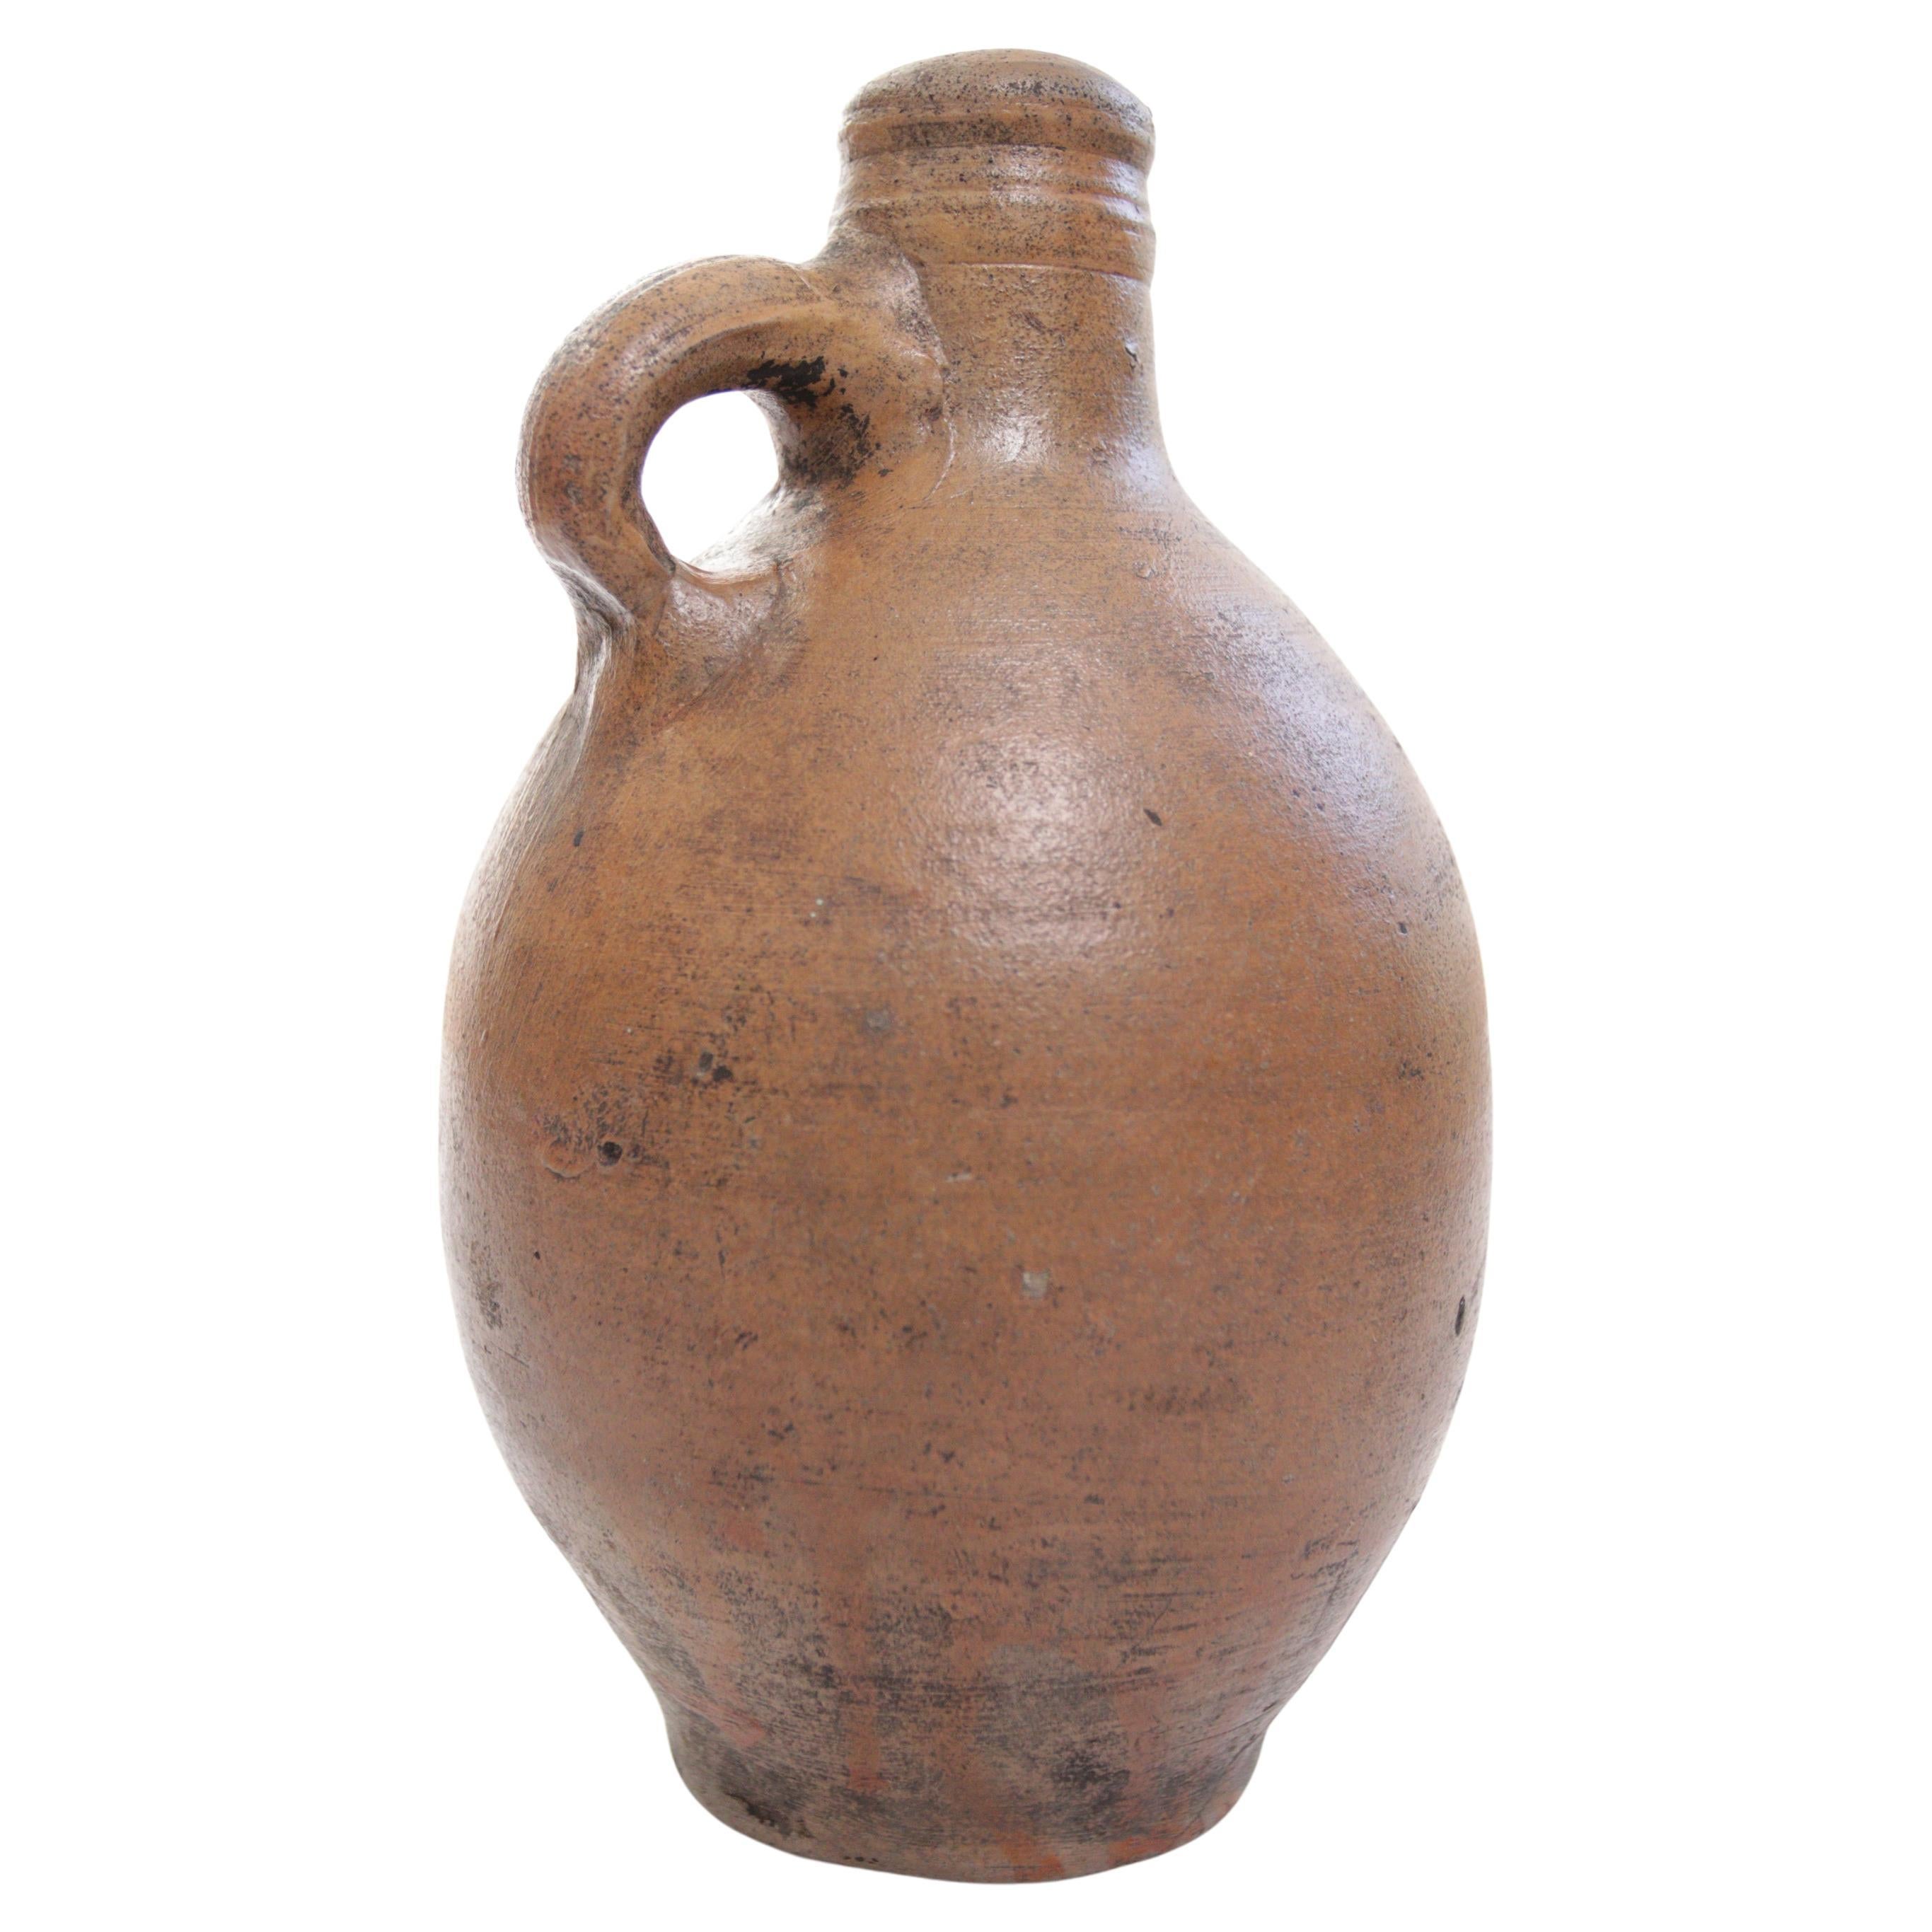 Wonderful stoneware Jug from the 17th century.
In good condition.

A perfect item for the Wabi Sabi, Natural looking interiors.